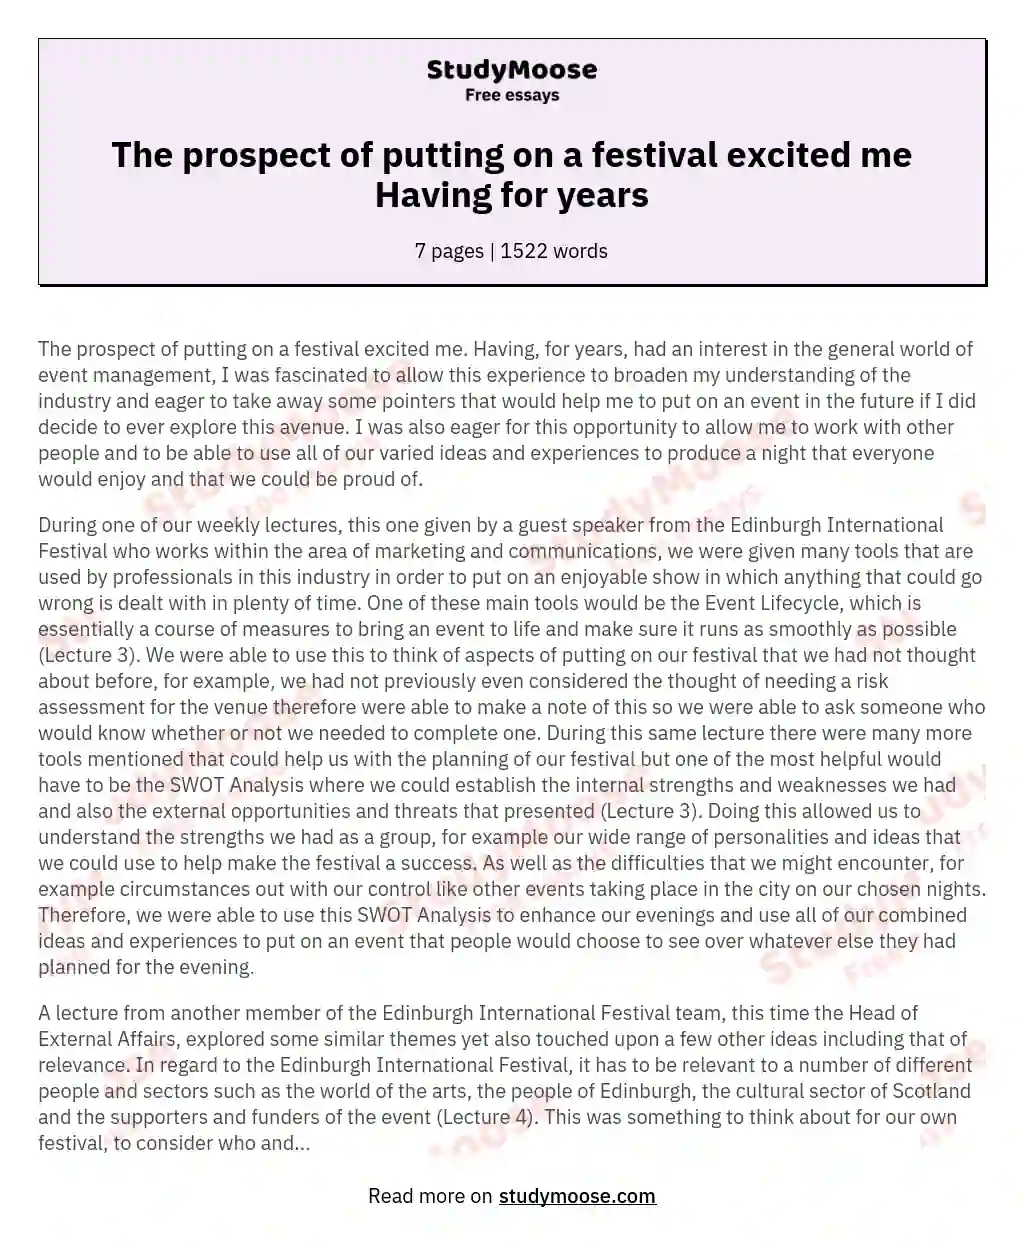 The prospect of putting on a festival excited me Having for years essay